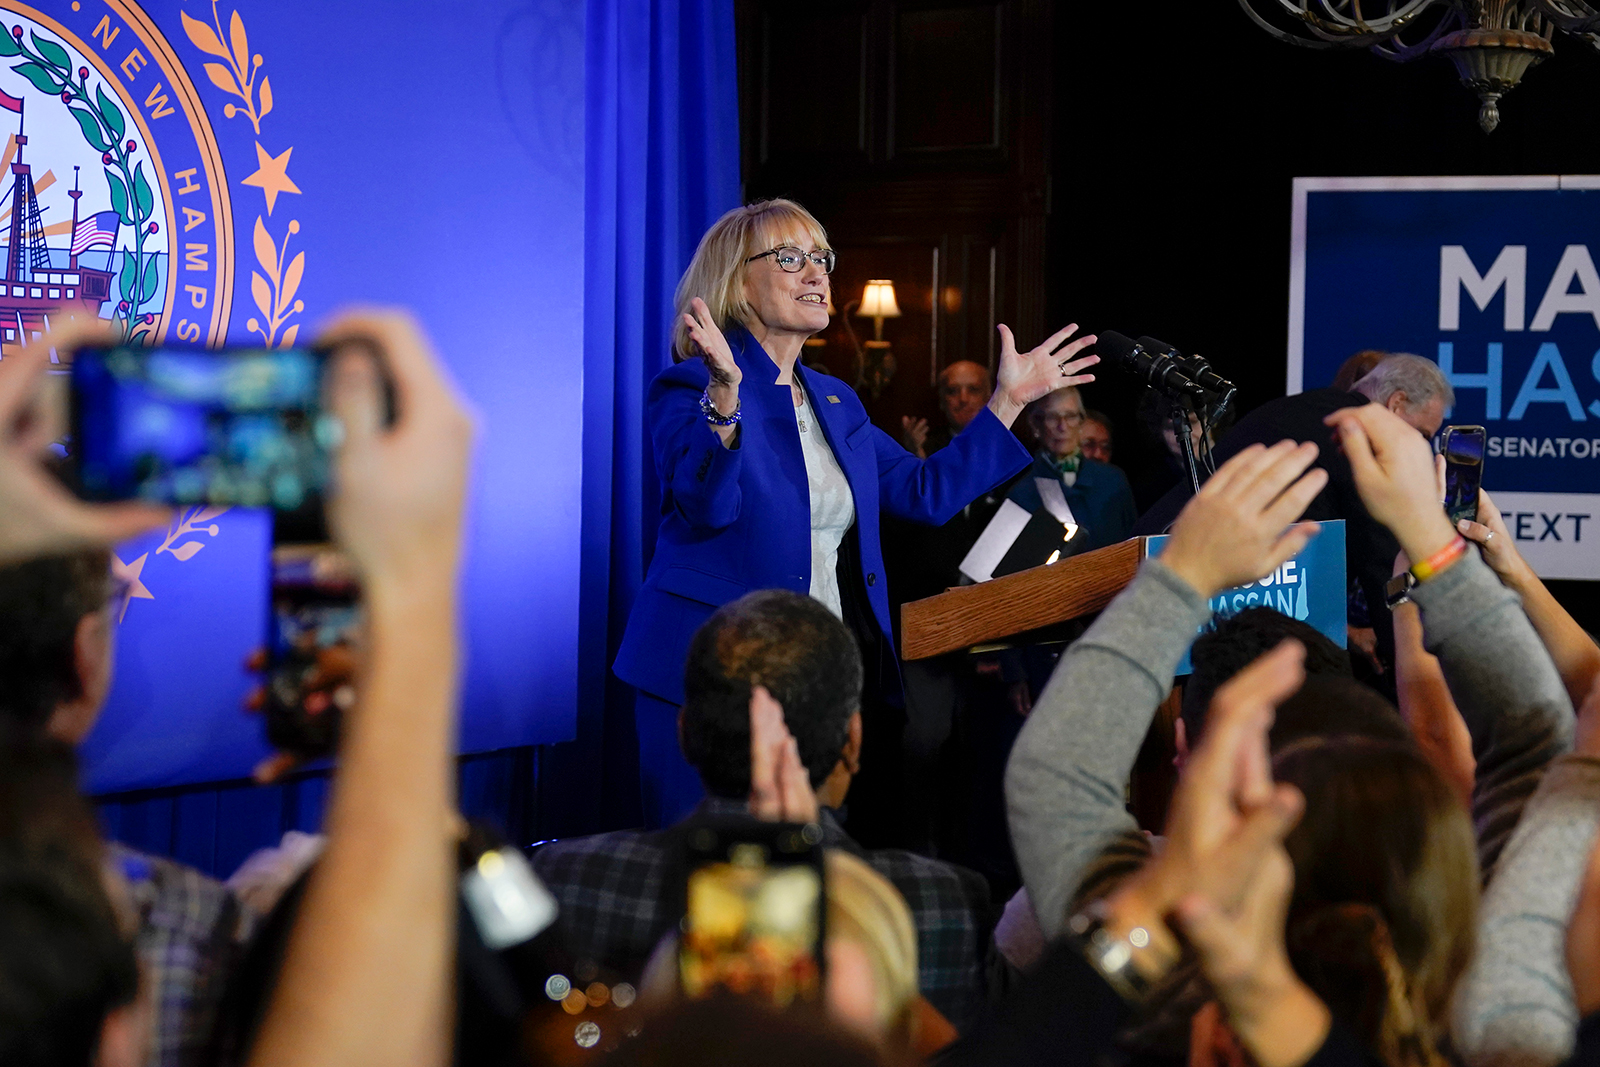 Maggie Hassan reacts during an election night campaign event in Manchester, New Hampshire, on November 8.